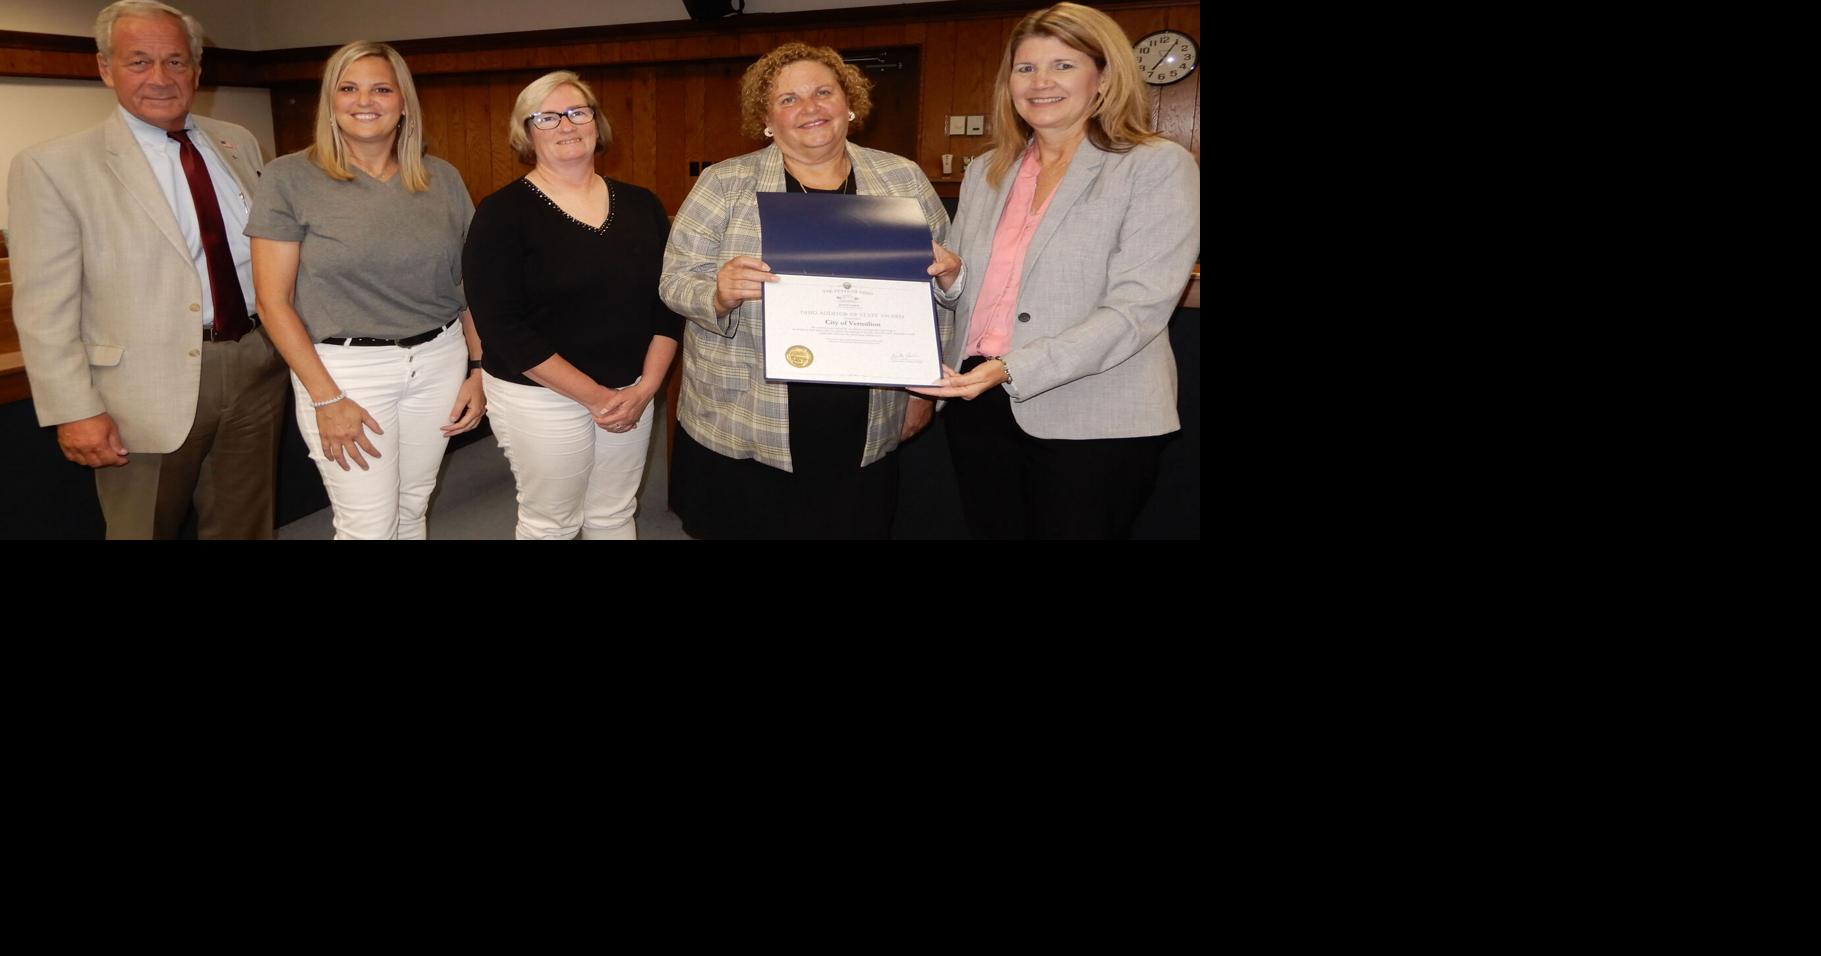 City receives Ohio Auditor of State Award | News ...